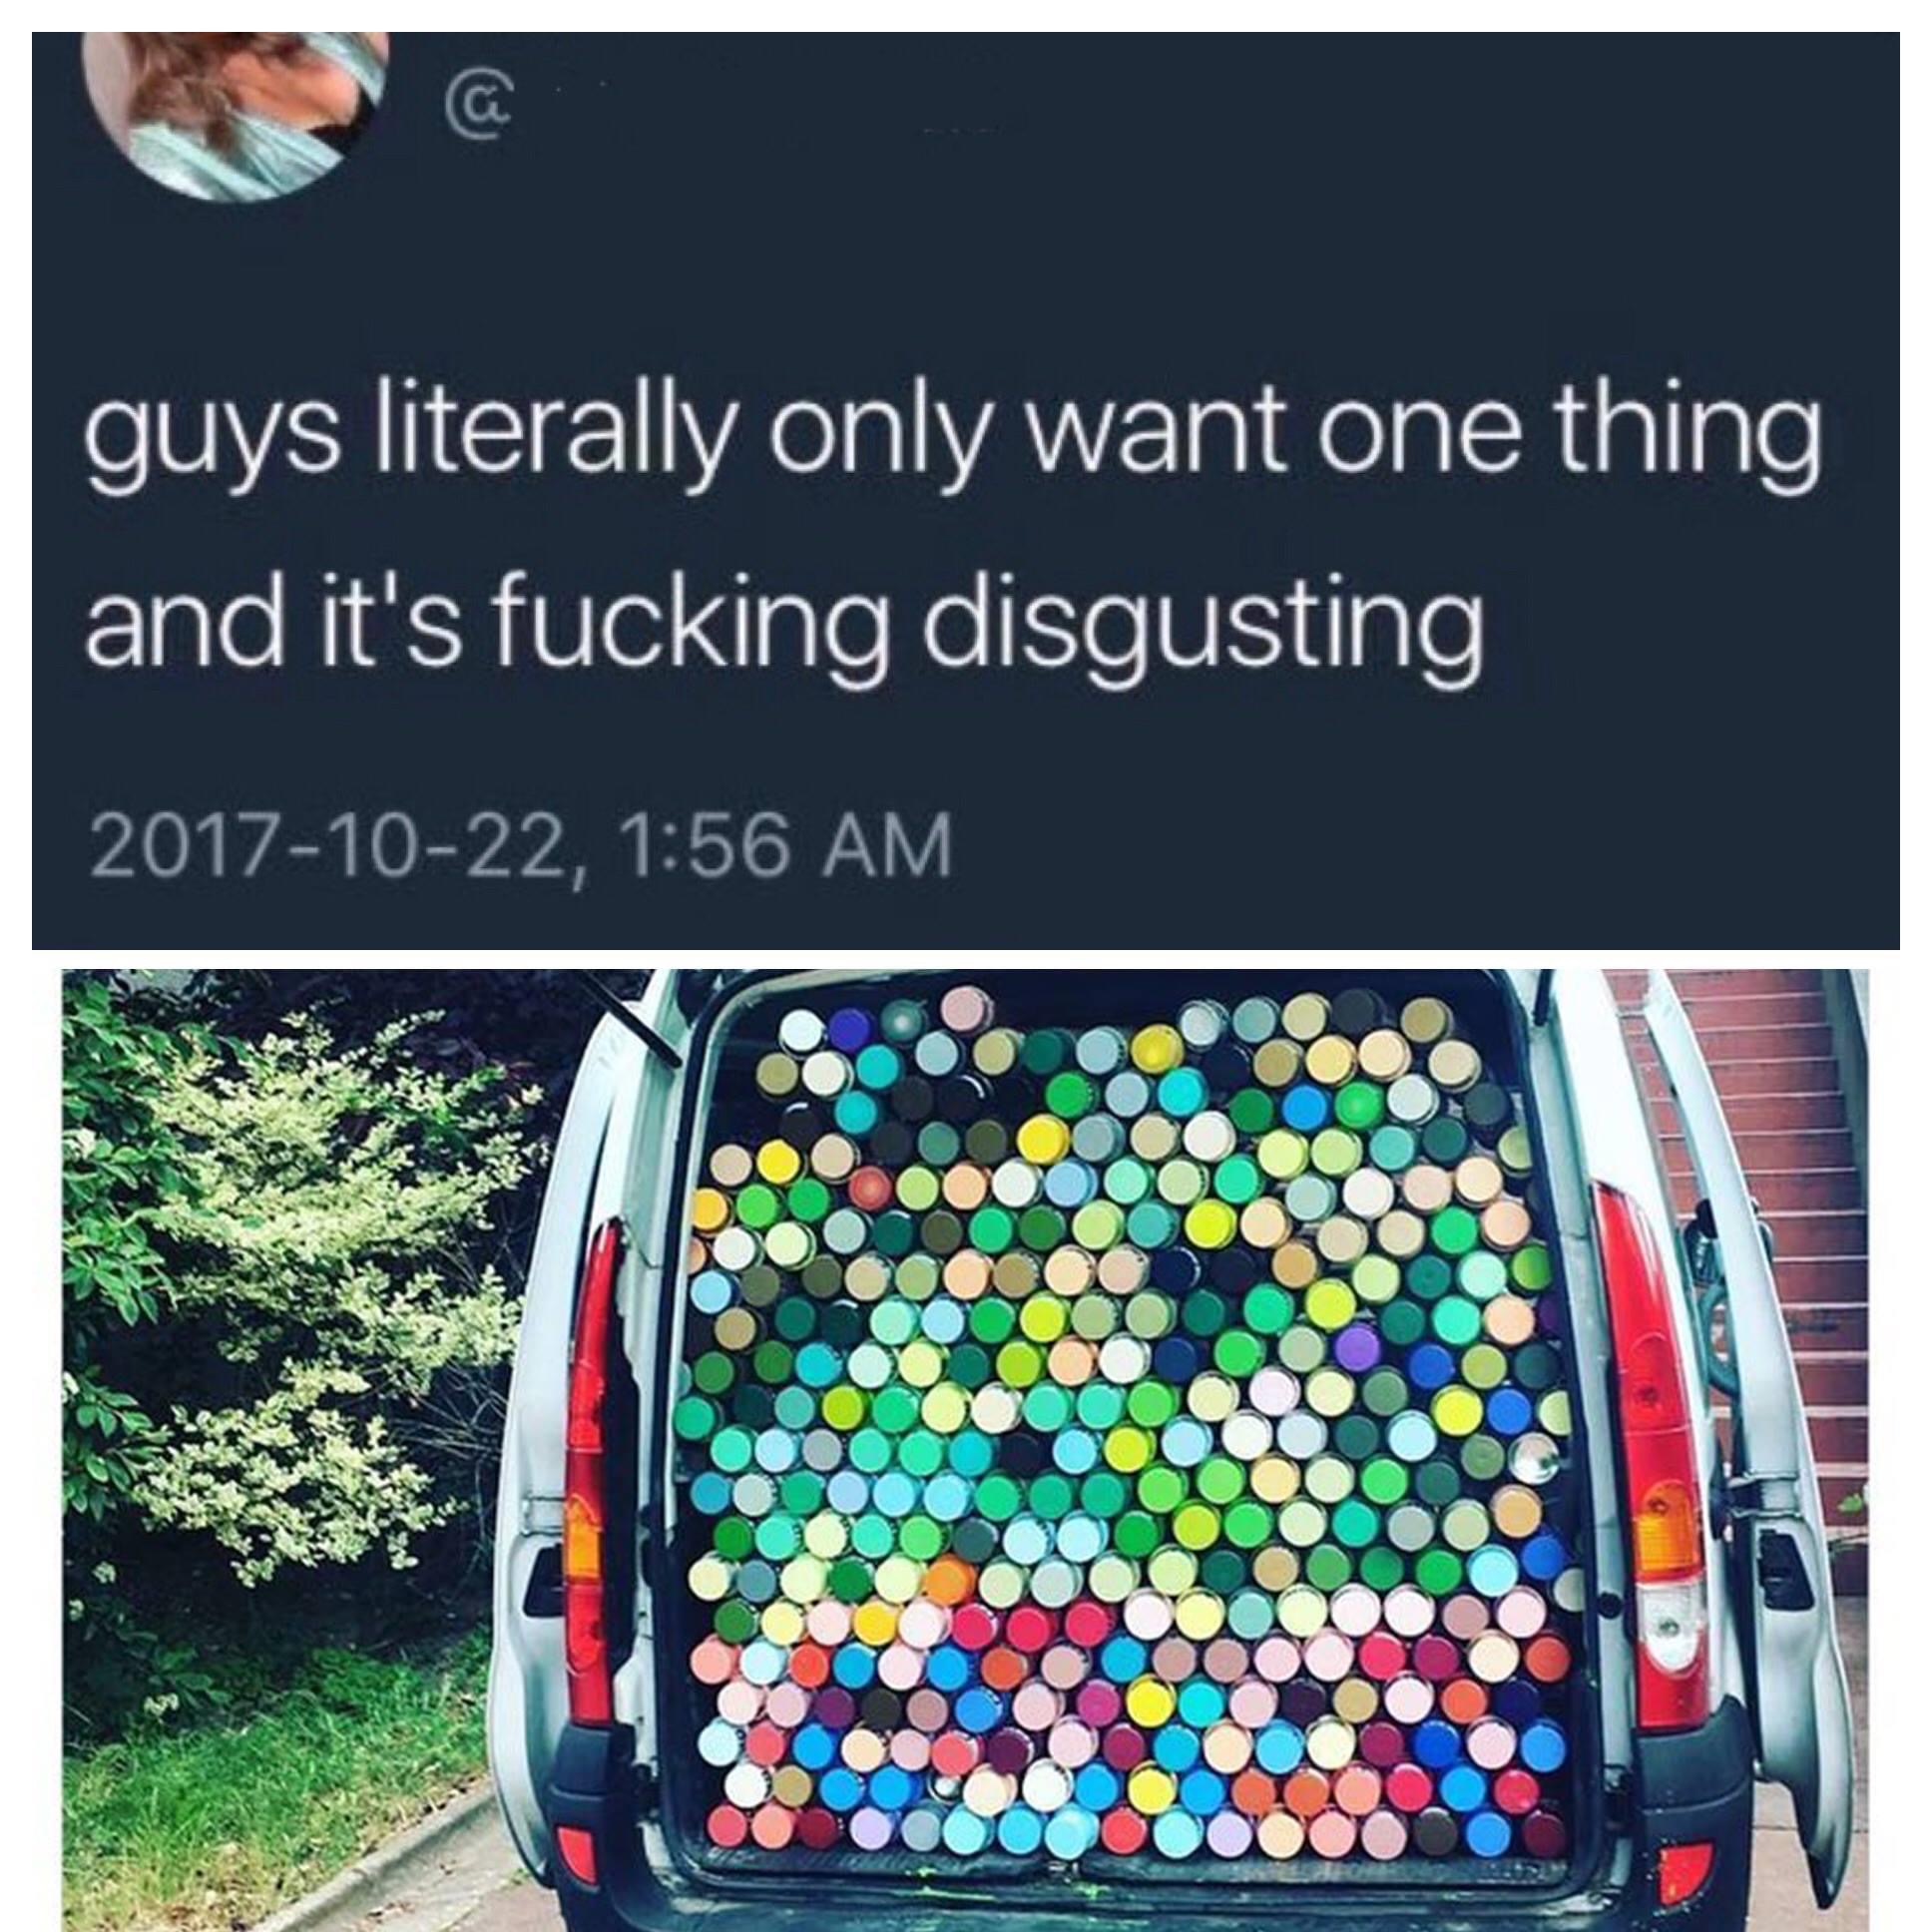 pattern - guys literally only want one thing and it's fucking disgusting ,